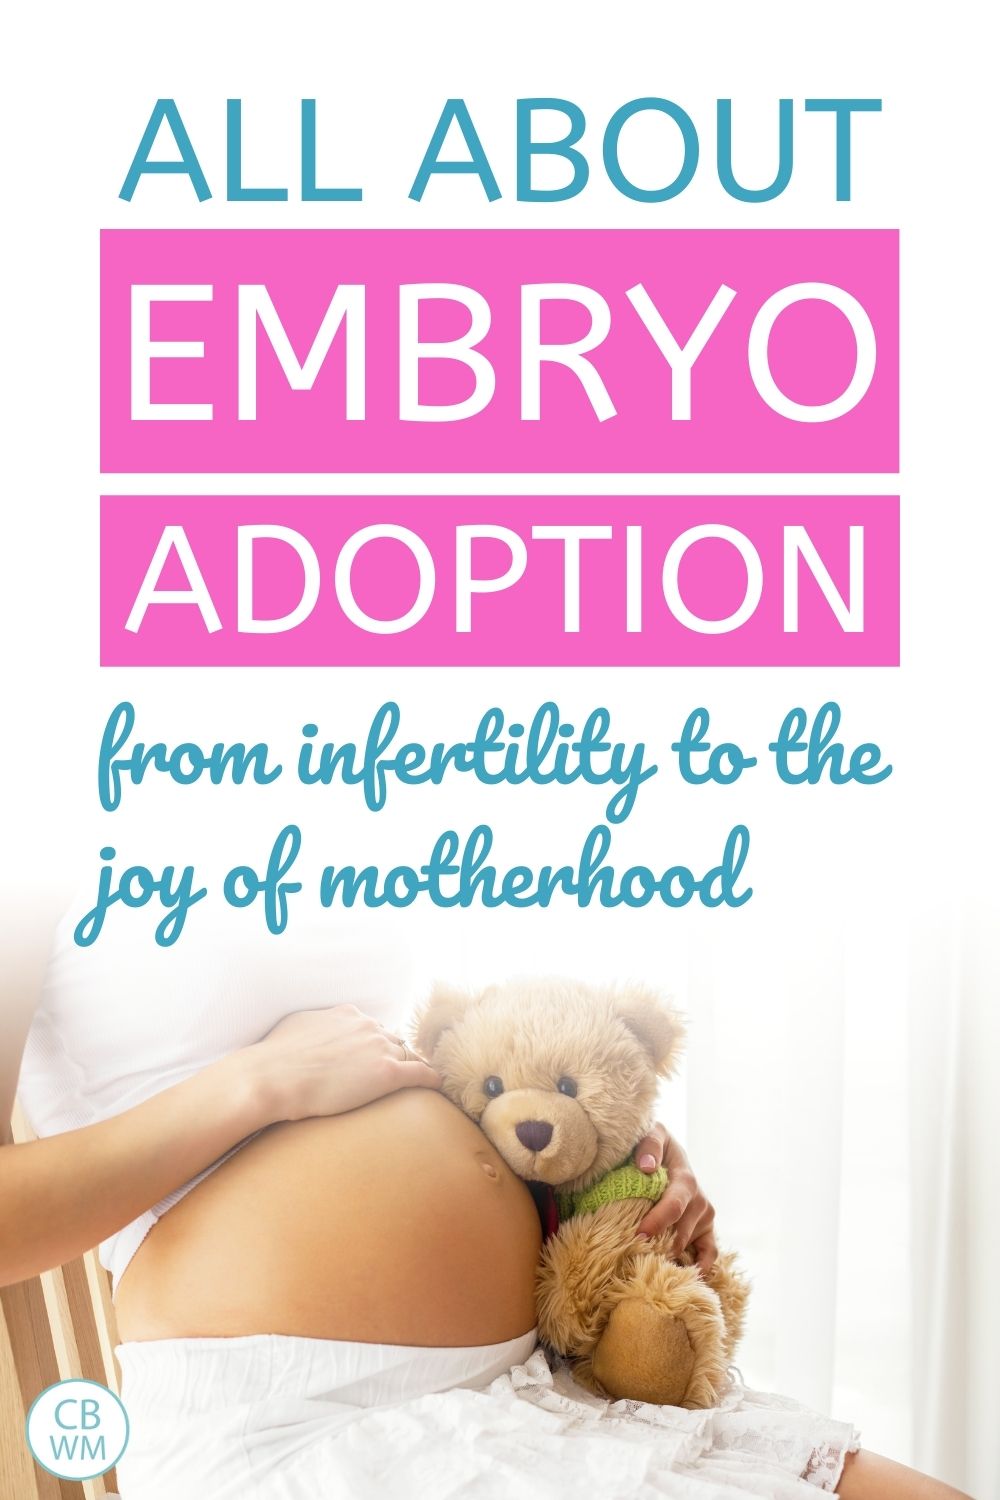 All about embryo adoption